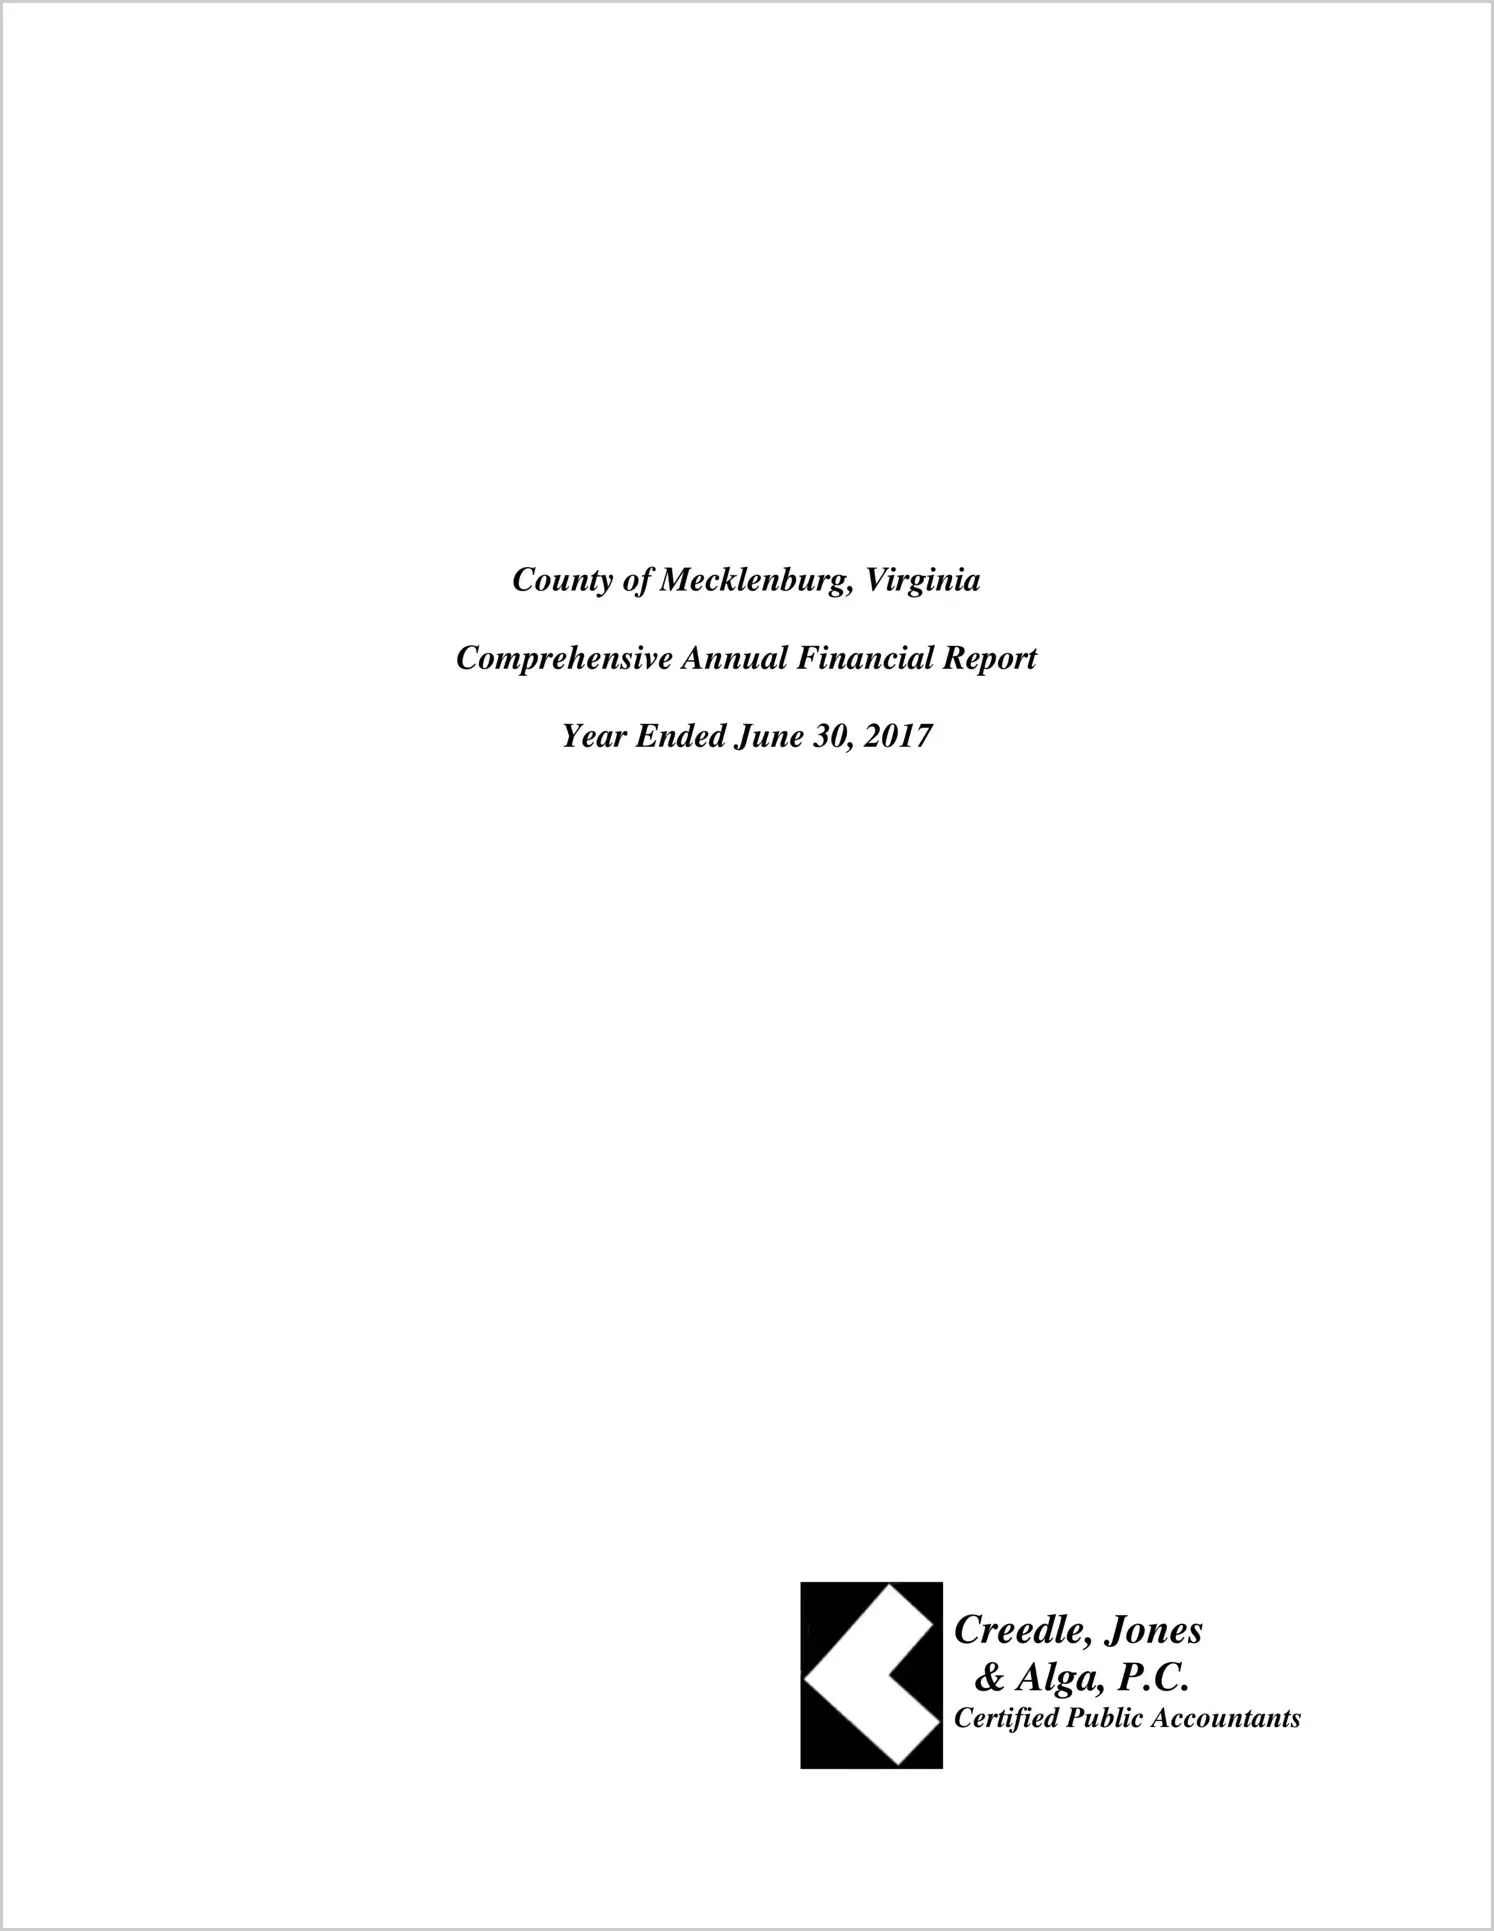 2017 Annual Financial Report for County of Mecklenburg